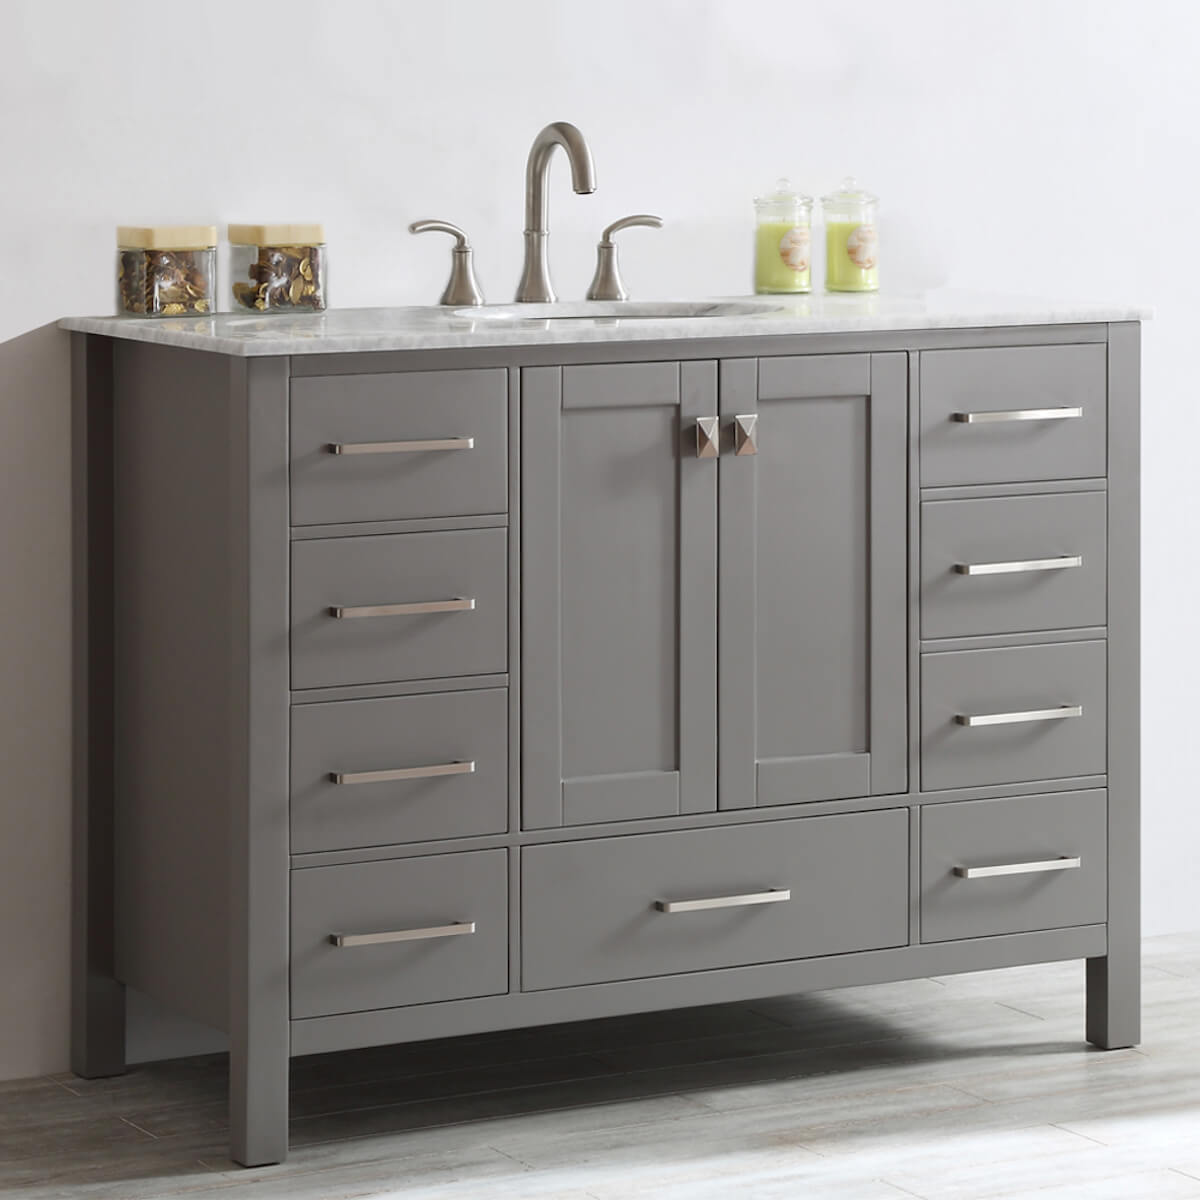 Vinnova Gela 48" Grey Freestanding  Single Vanity with Carrara White Marble Countertop Without Mirror Side 723048-GR-CA-NM